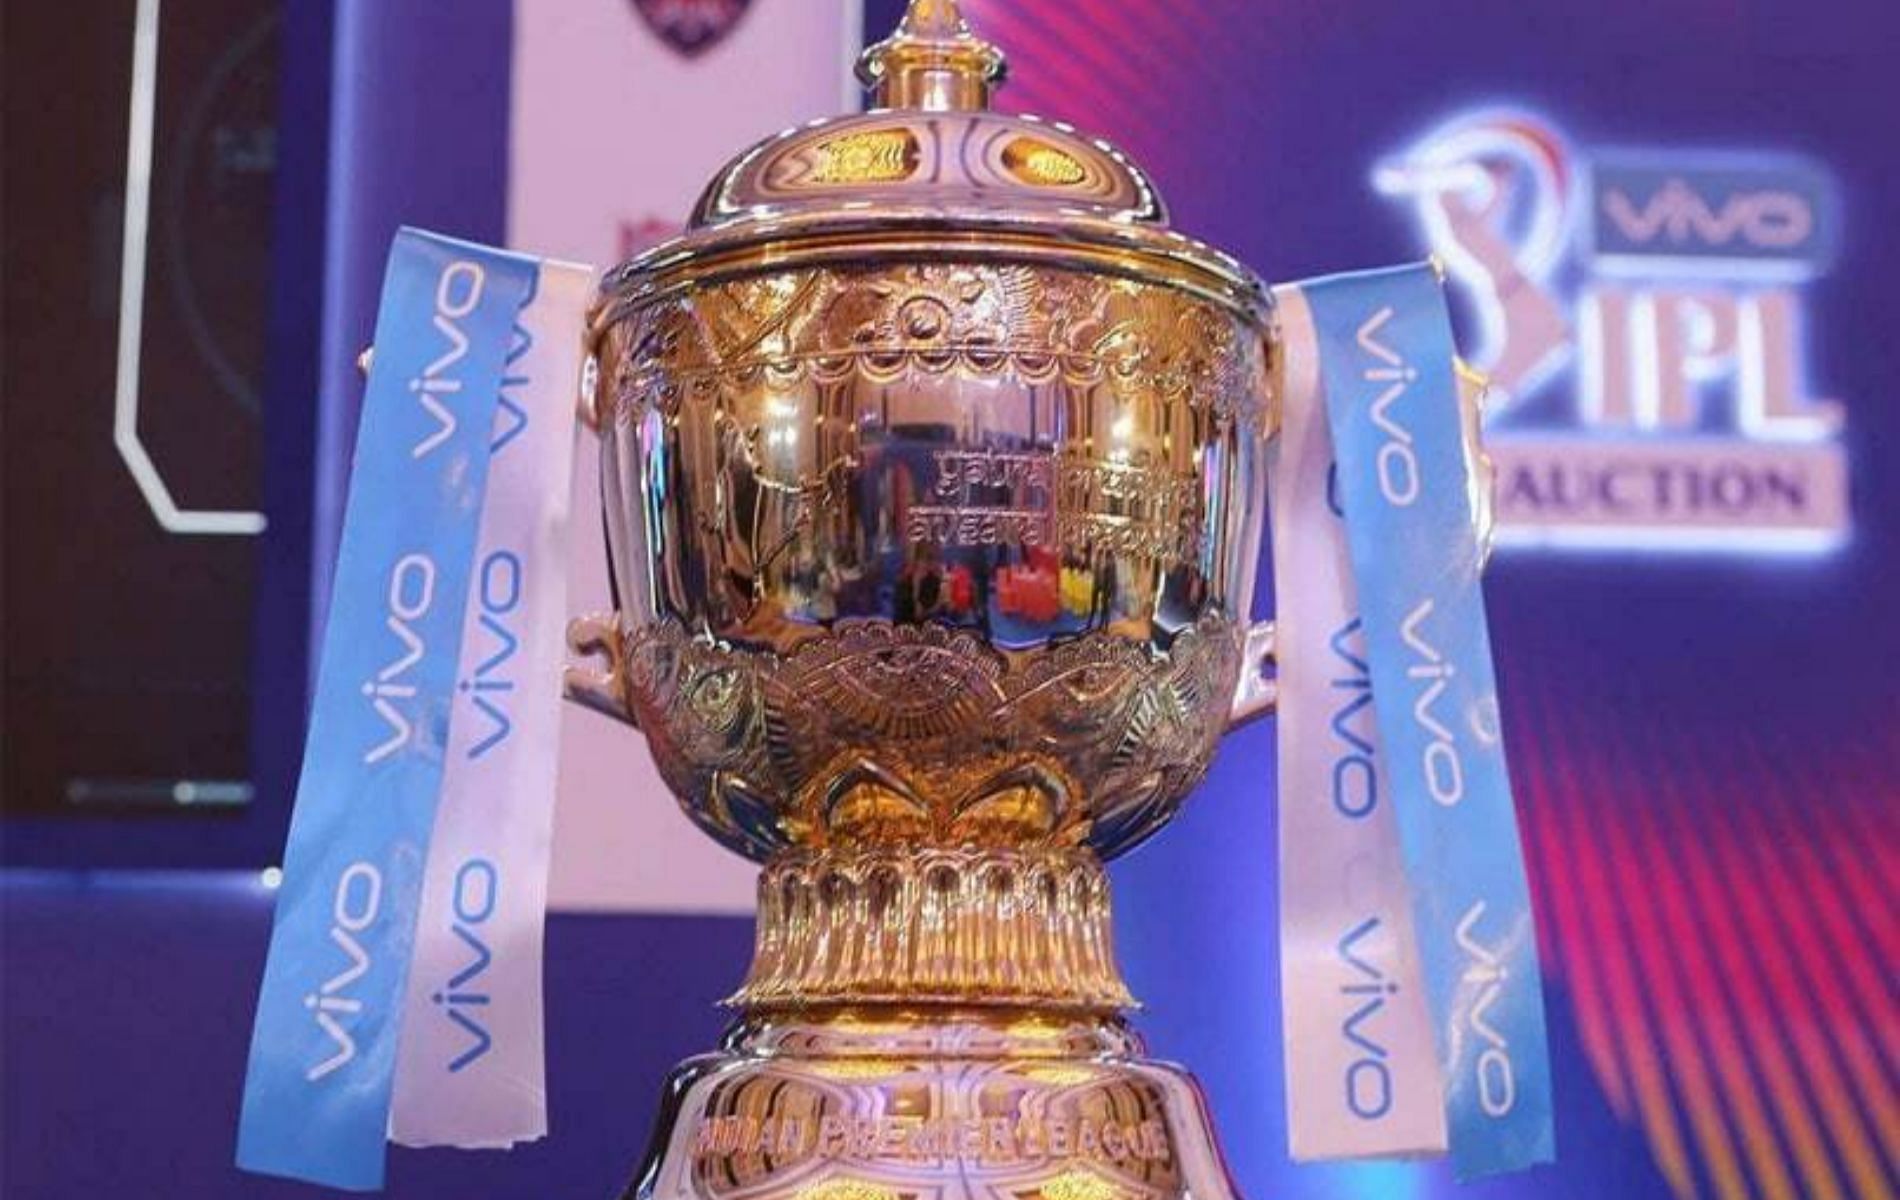 The IPL will be a 10-team tournament from 2022.